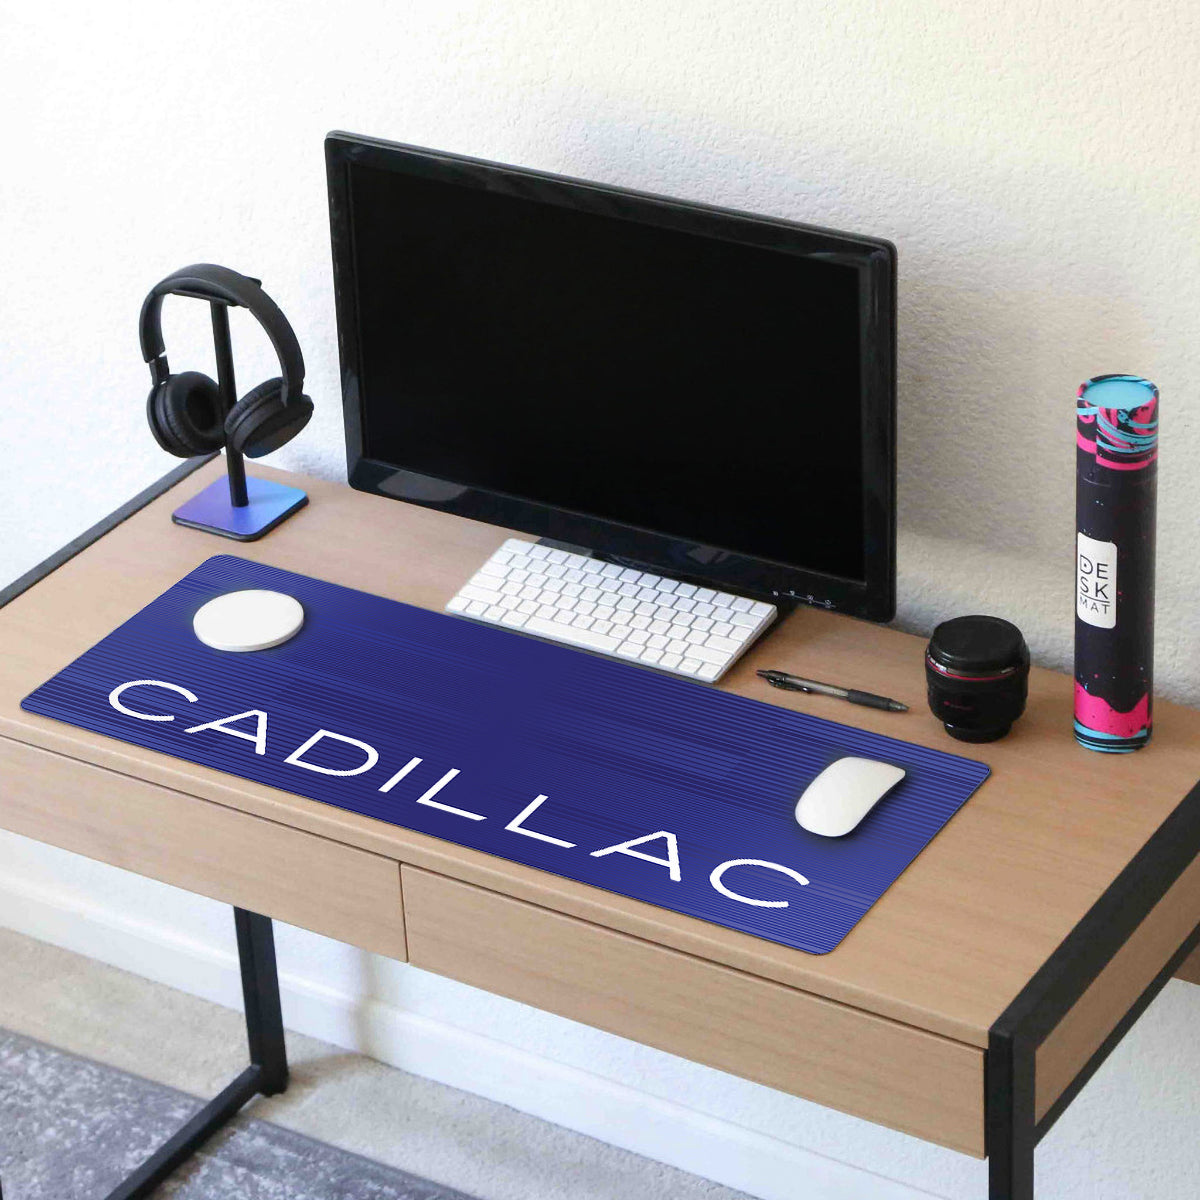 Cadillac Recycled Blue Desk Mat